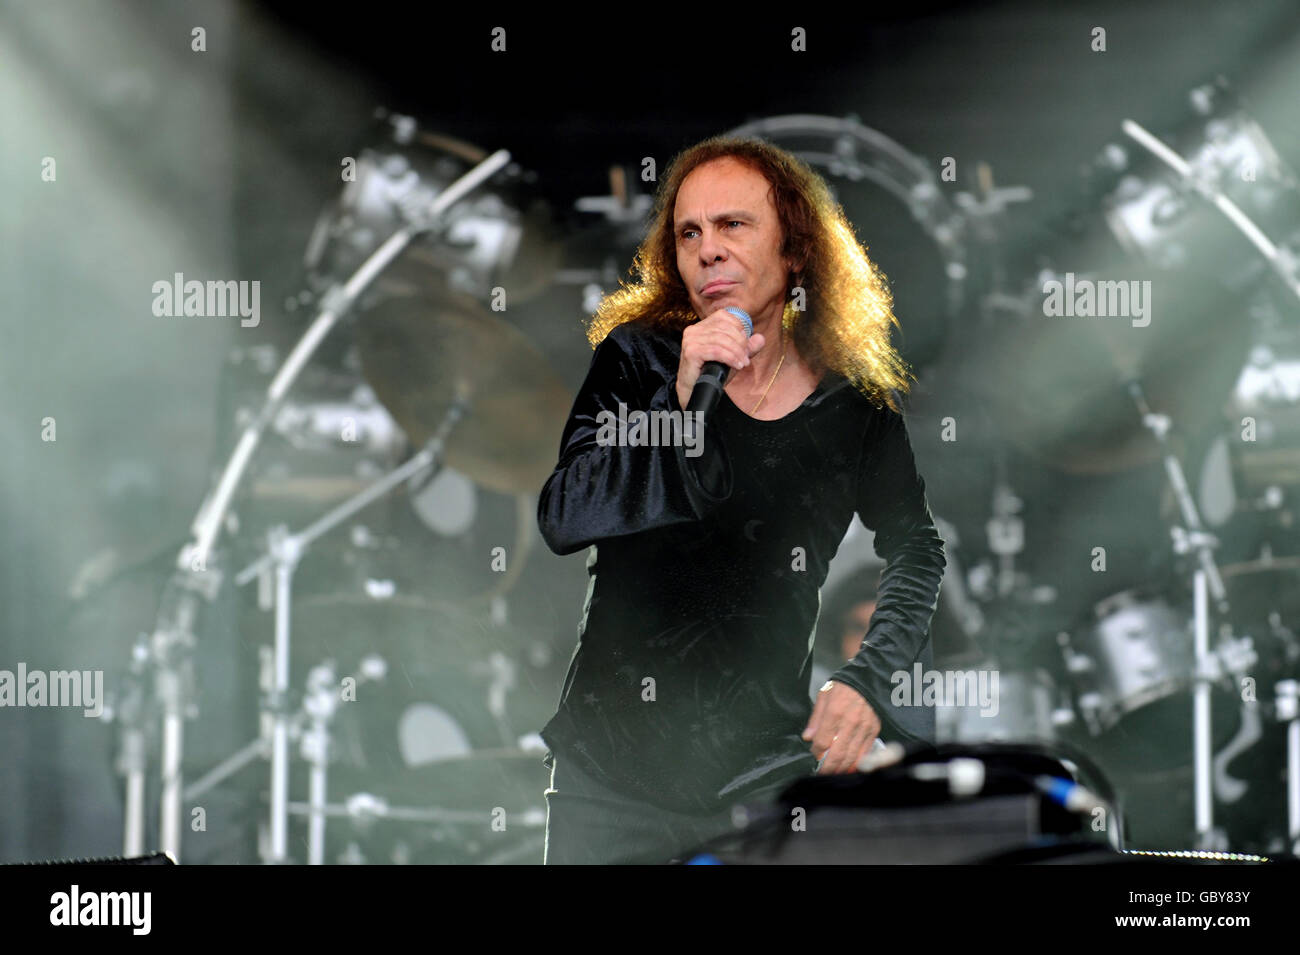 Sonisphere Festival - Knebworth. Ronnie James Dio of Heaven and Hell performs on stage on Day 1 of Sonisphere Festival at Knebworth. Stock Photo